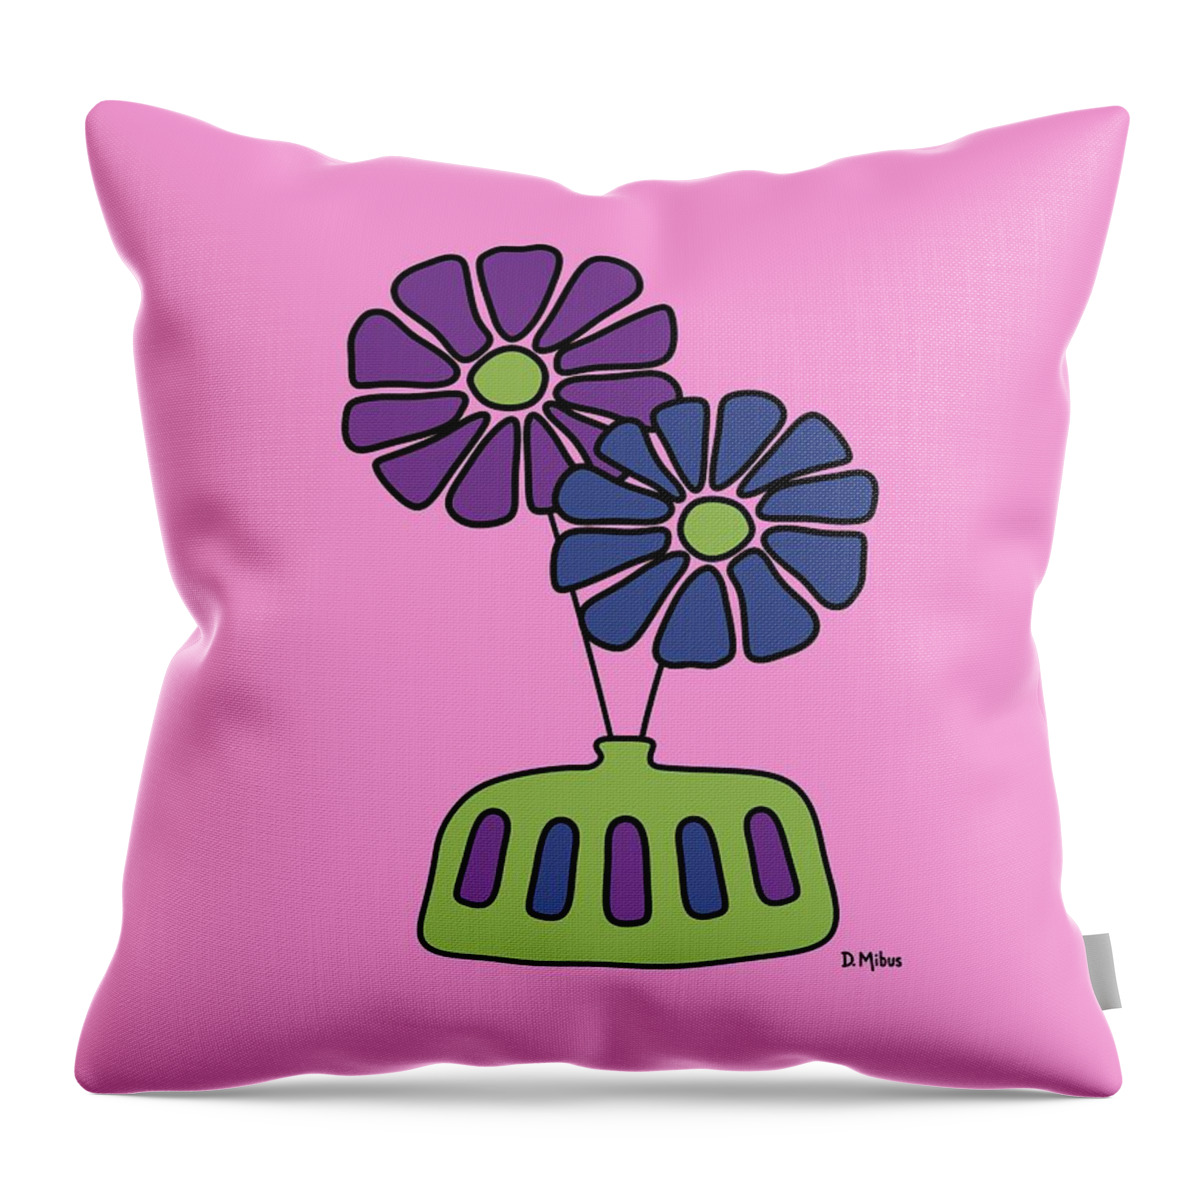 Groovy Throw Pillow featuring the digital art Groovy Purple and Blue FLowers on Pink by Donna Mibus